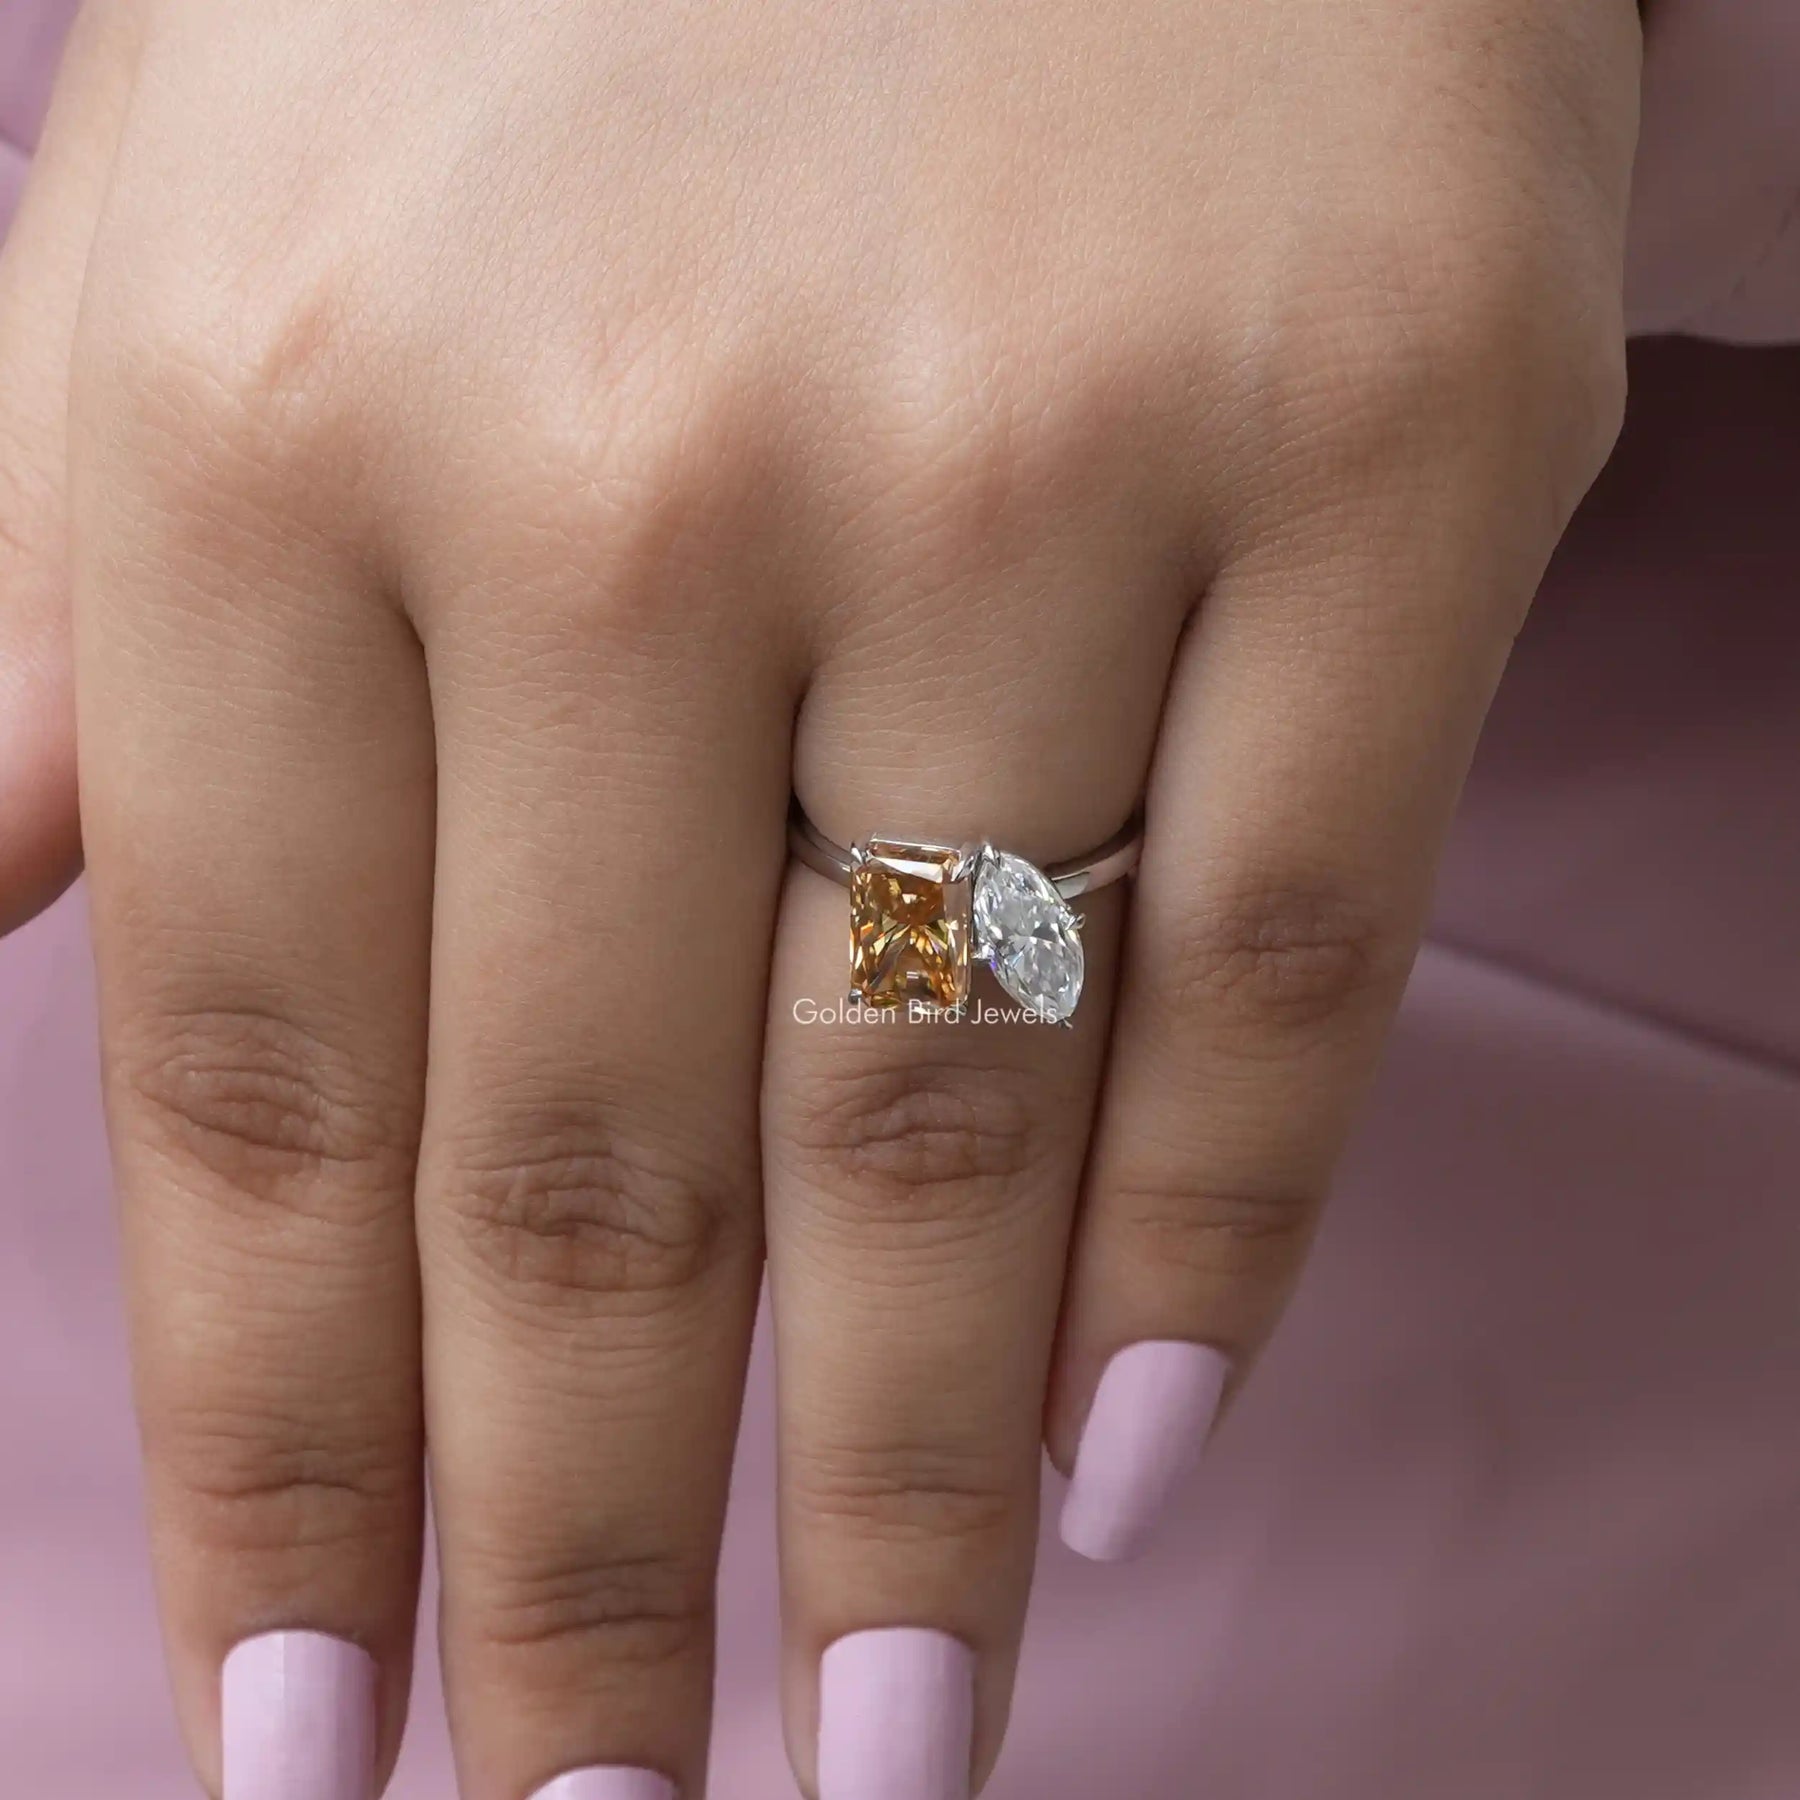 [In finger front view of two stone toi et moi ring]-[Golden Bird Jewels]